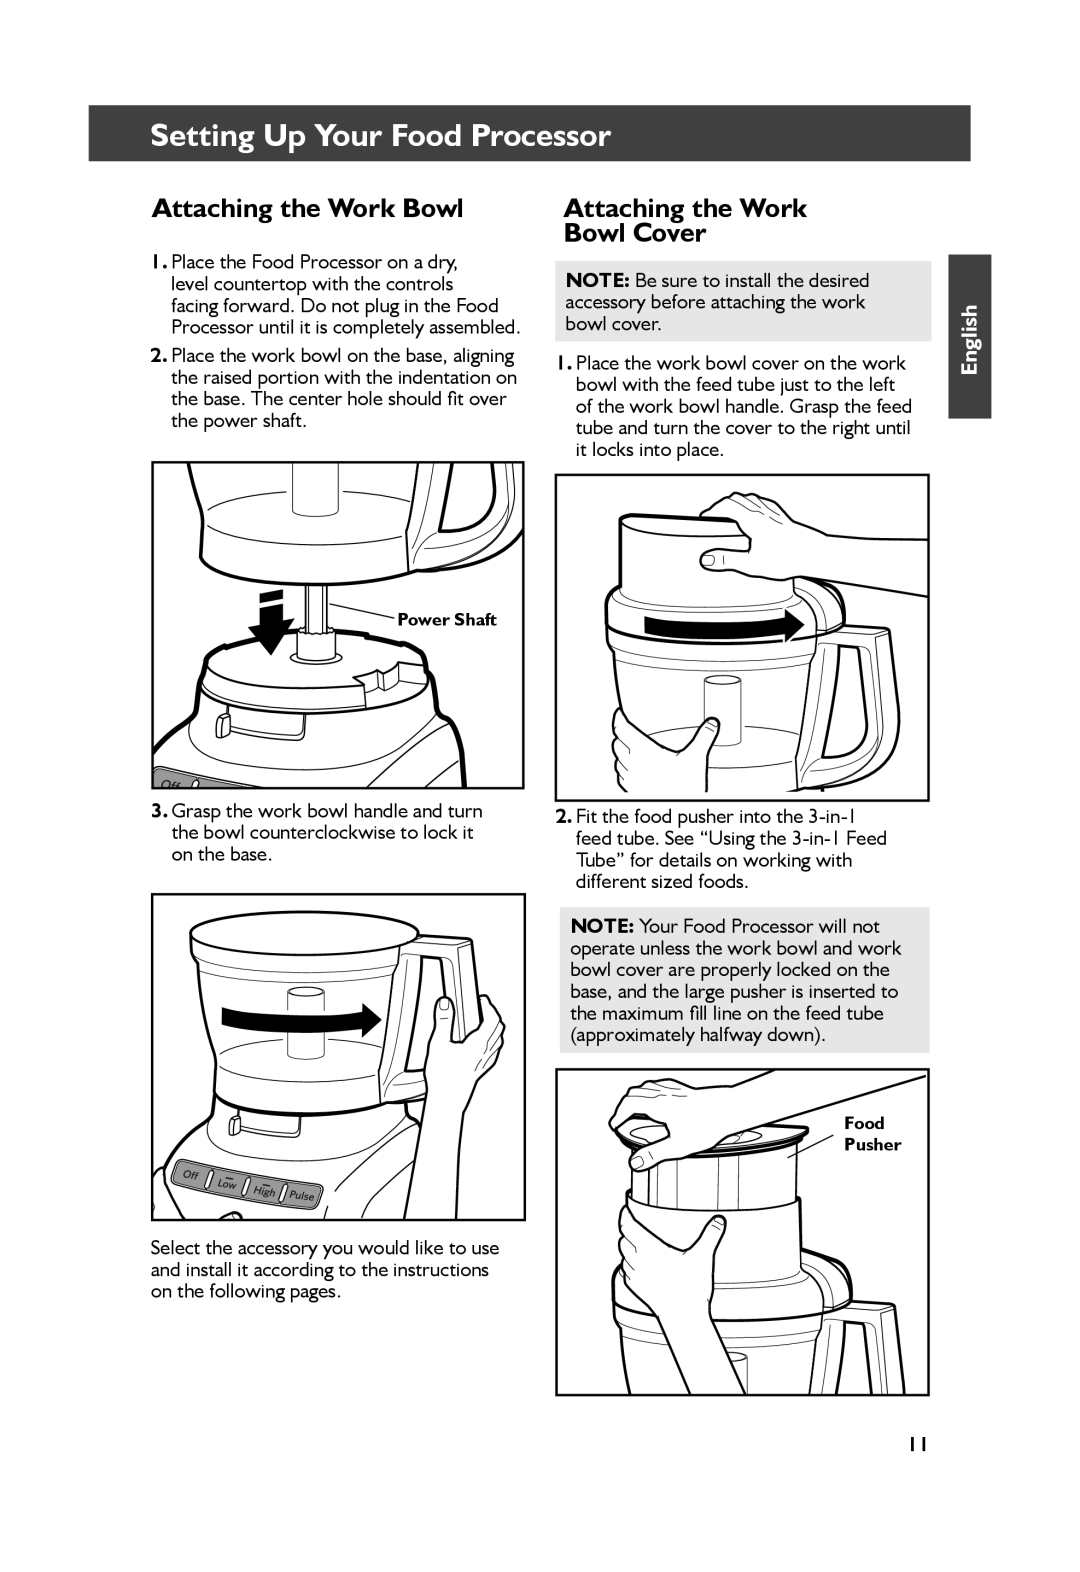 KitchenAid KFP1344, KFP1333 manual Setting Up Your Food Processor, Attaching the Work Bowl Cover, English 